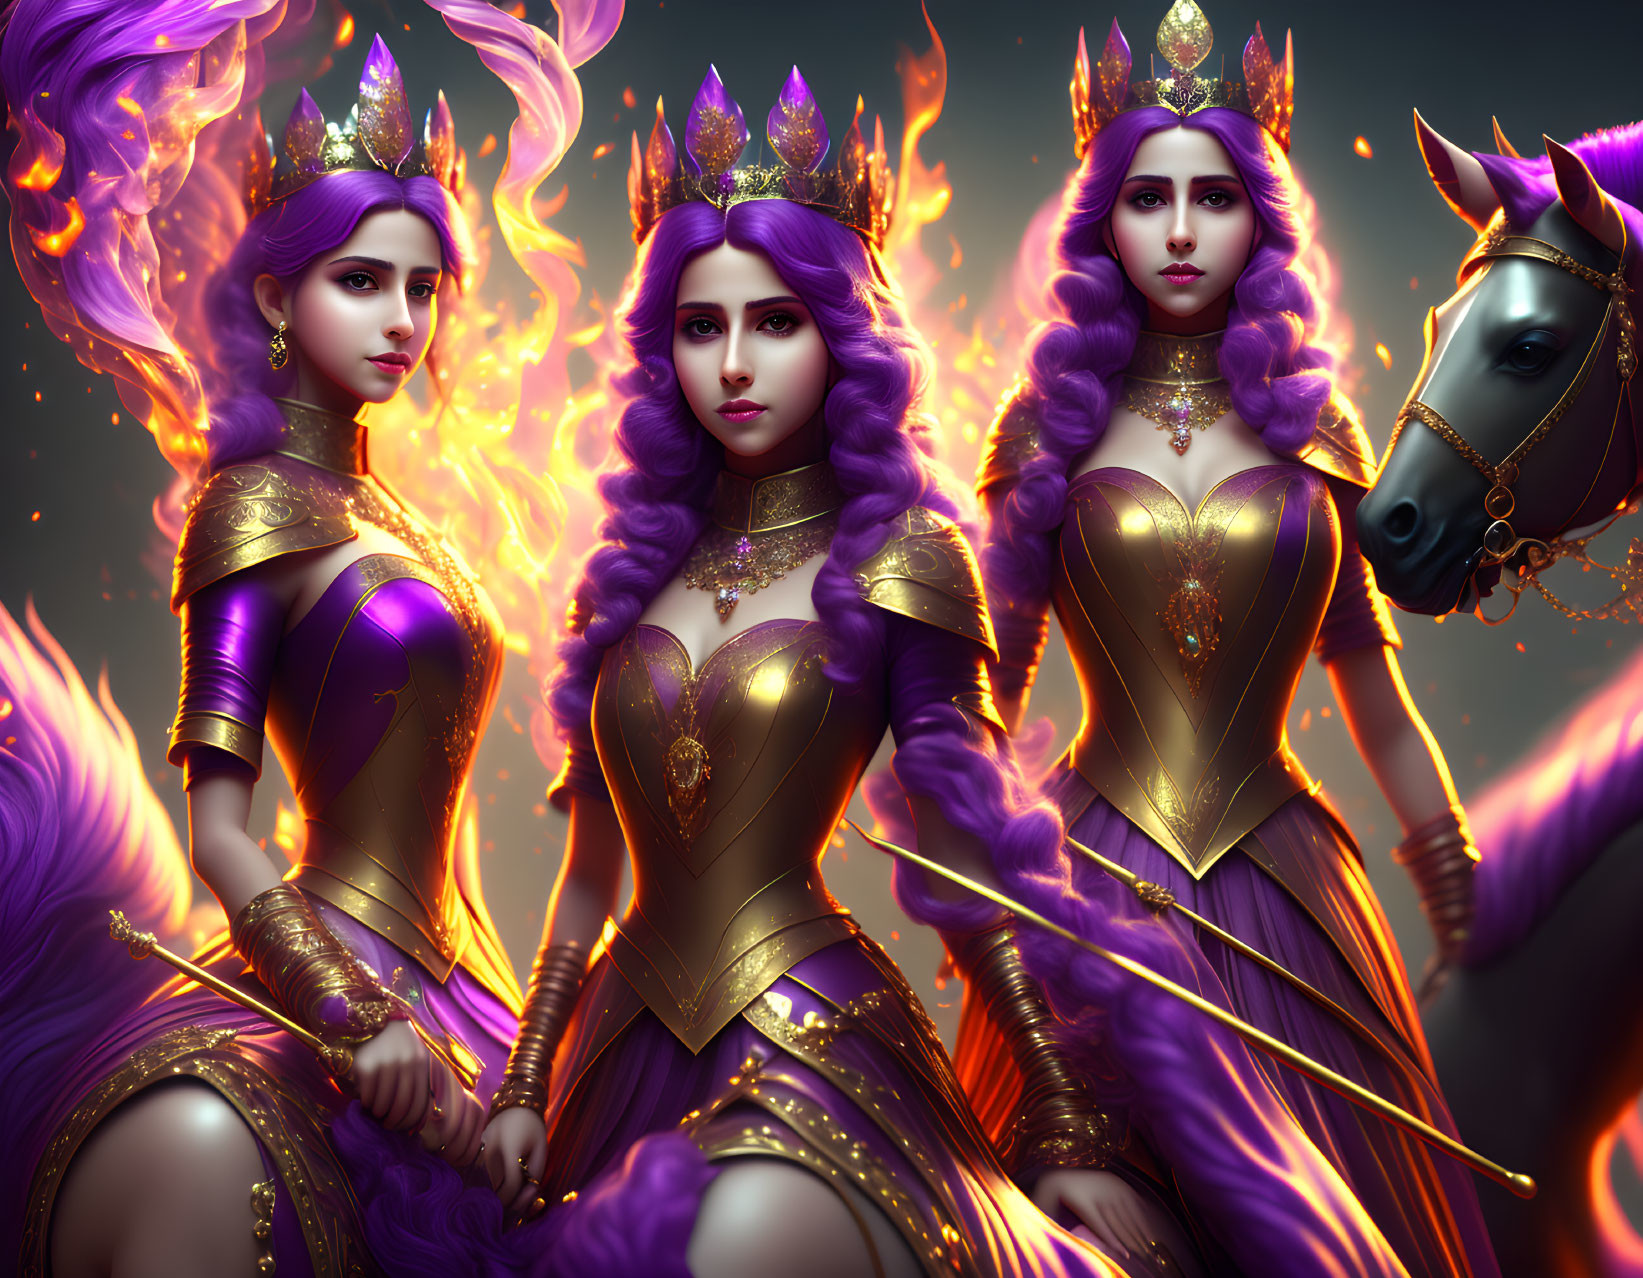 Three identical women in regal purple and gold armor with flames and a horse.